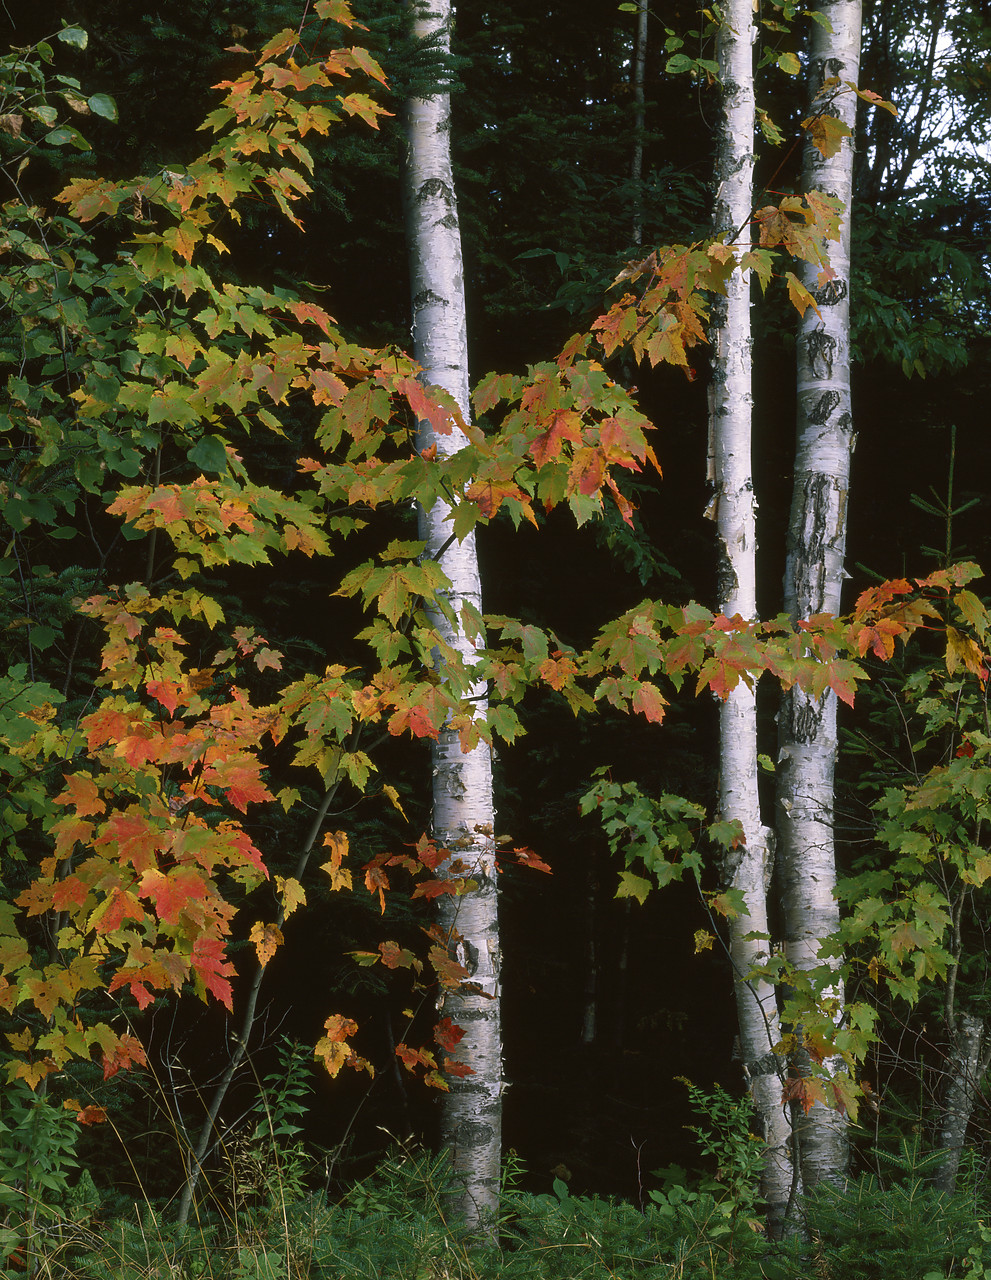 #903147-1 - Silver Birch & Maples in Autumn, White Mountain National Forest, New Hampshire, USA